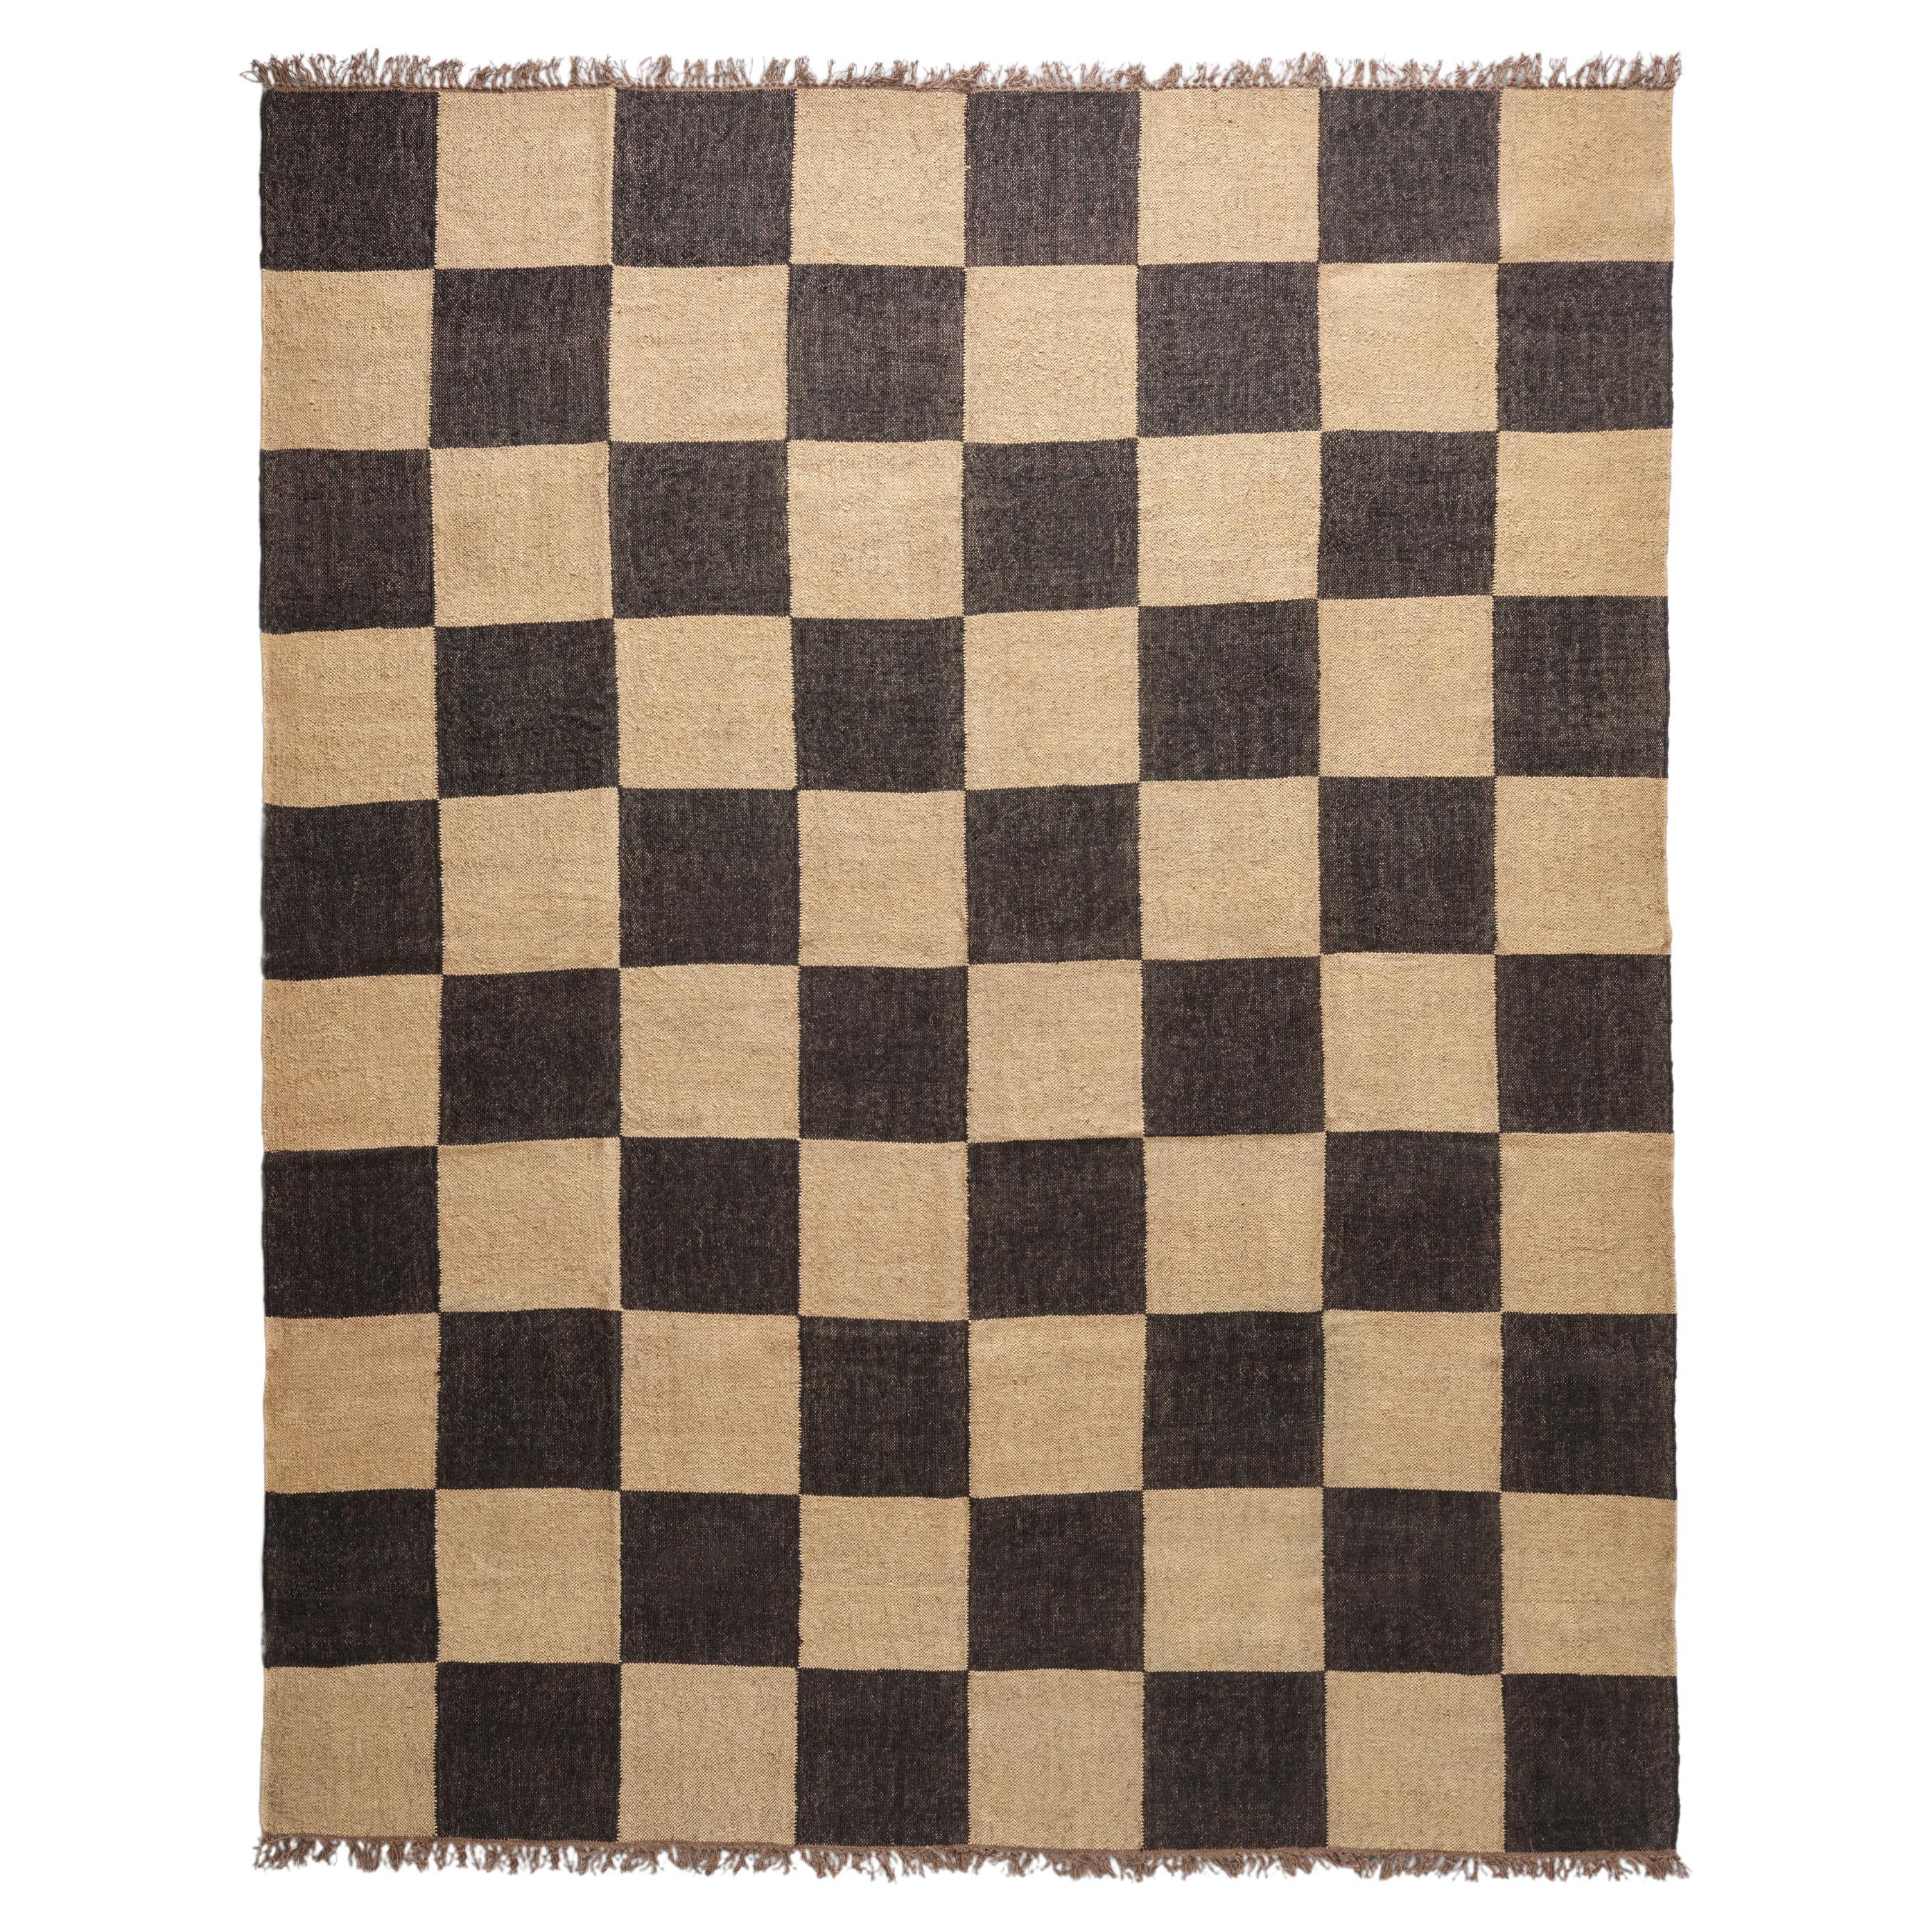 The Forsyth Checkerboard Rug - Big Checks in Off Black, 9x12 For Sale